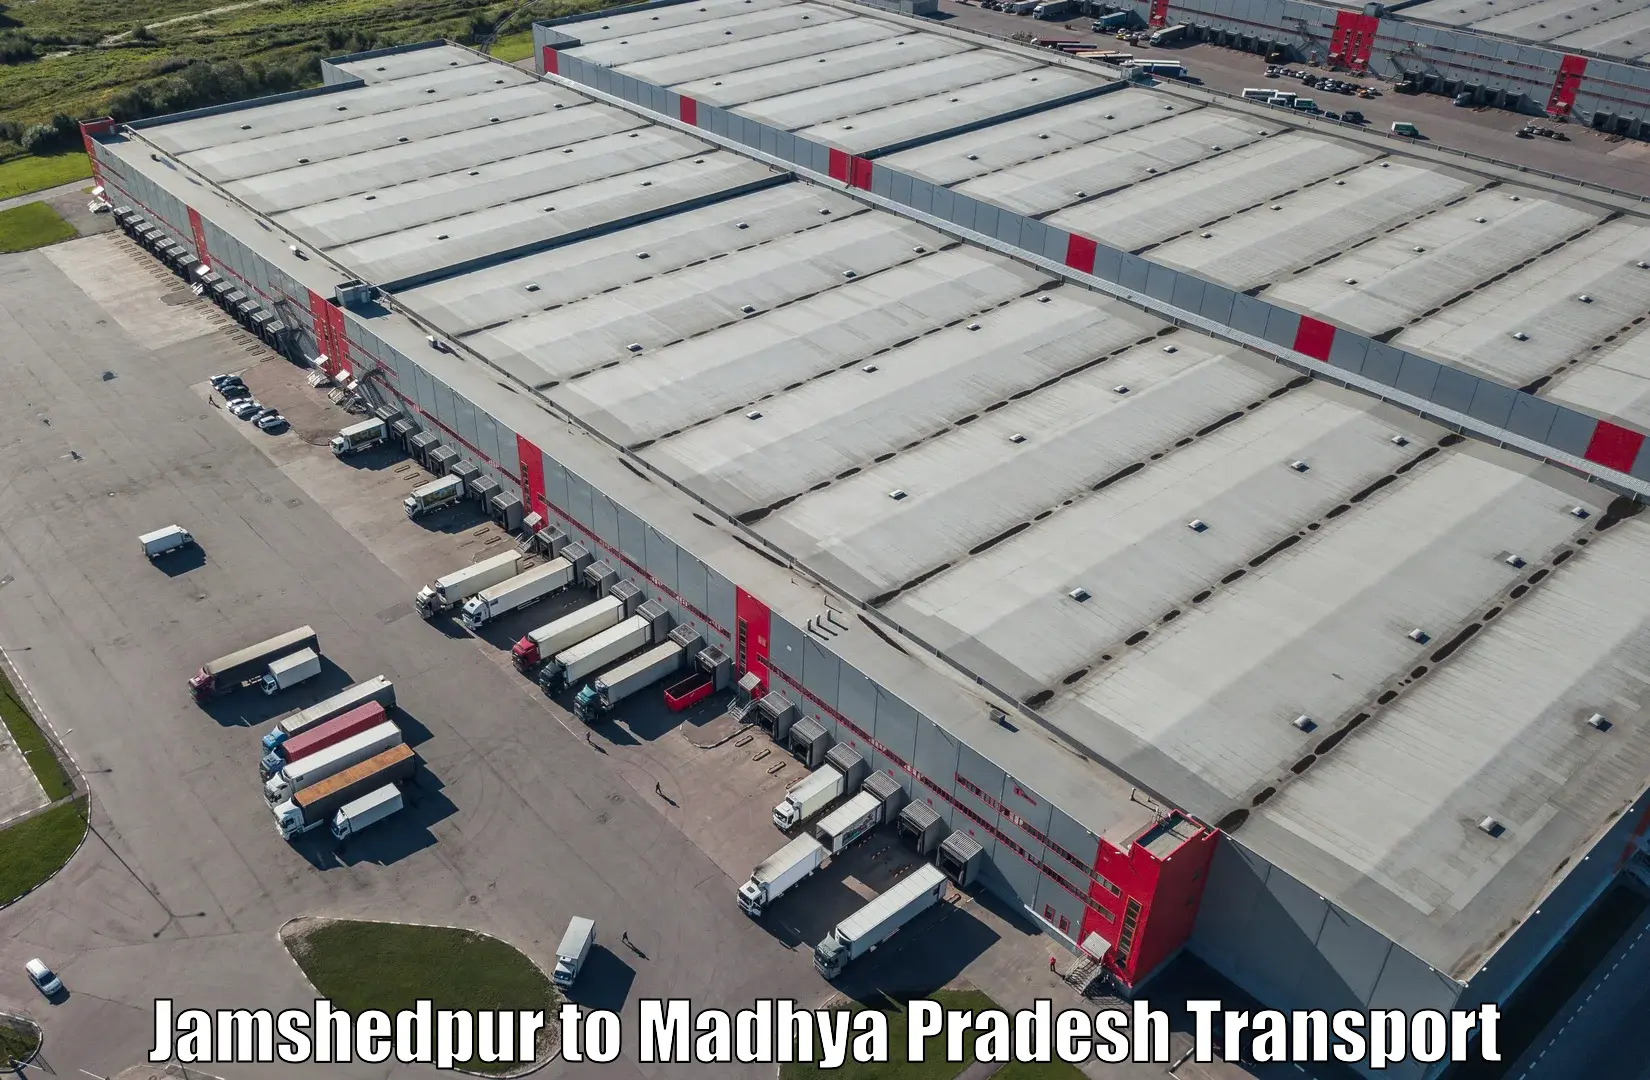 Cargo train transport services Jamshedpur to Nainpur